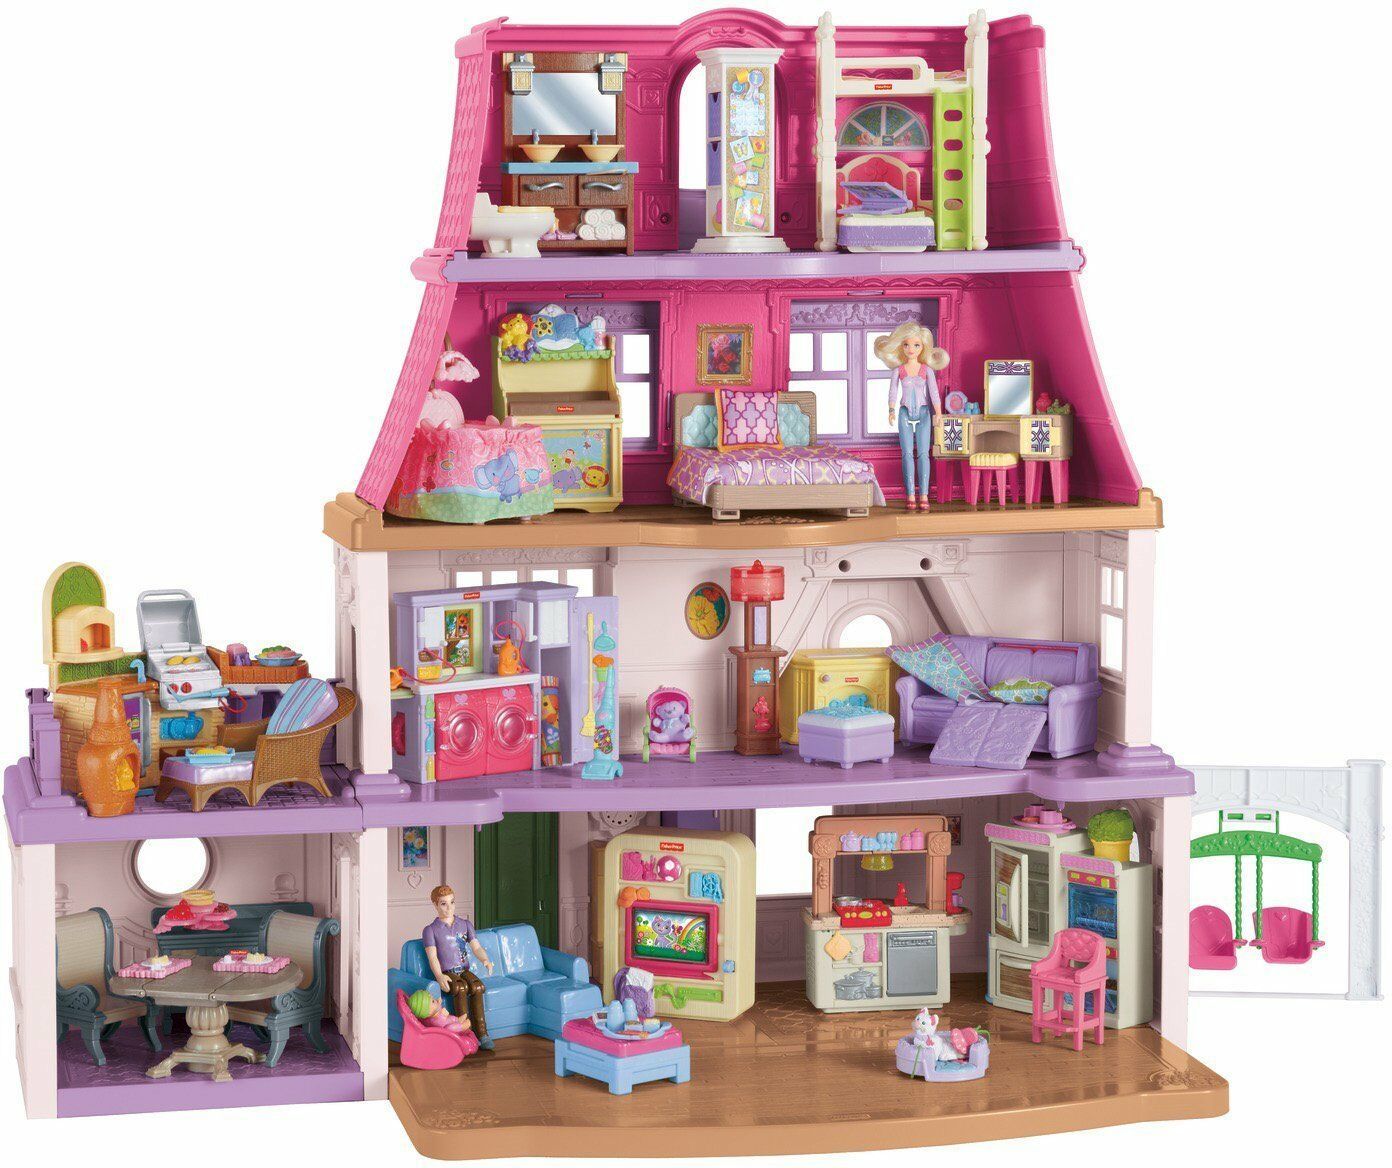 Fisher Price Loving Family 4 Story Children's Toy Dollhouse Mansion Playset - $299.99